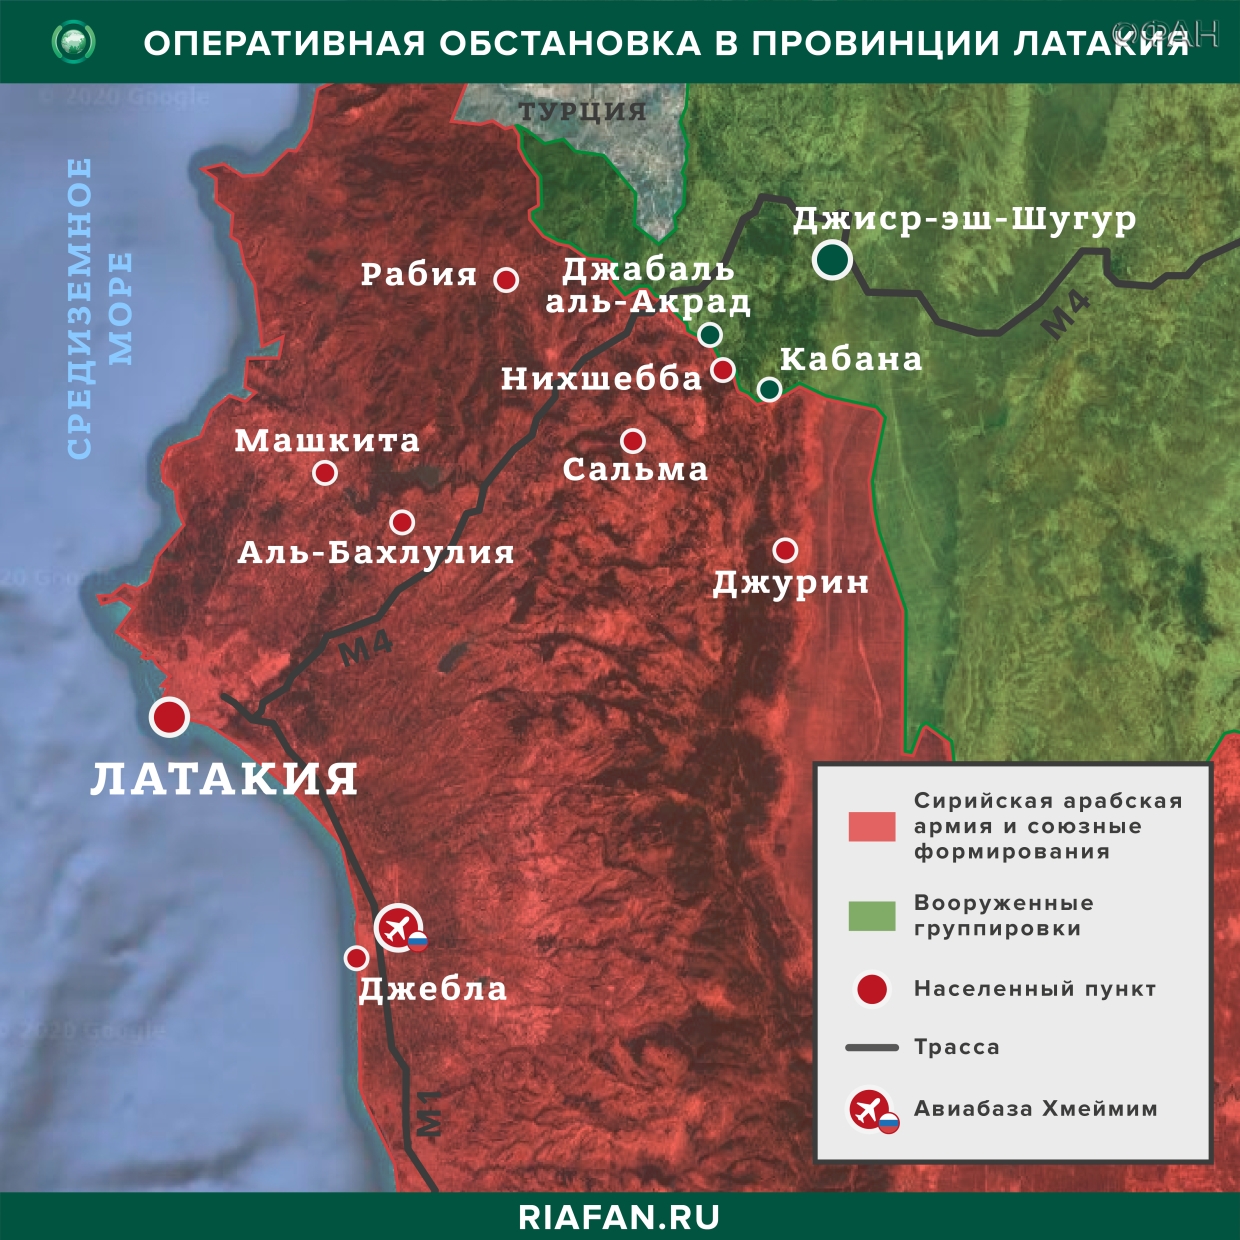 Syria the results of the day on 29 February 06.00: new attack Israel in Quneitra, Turkey has stepped up attacks in the SAR